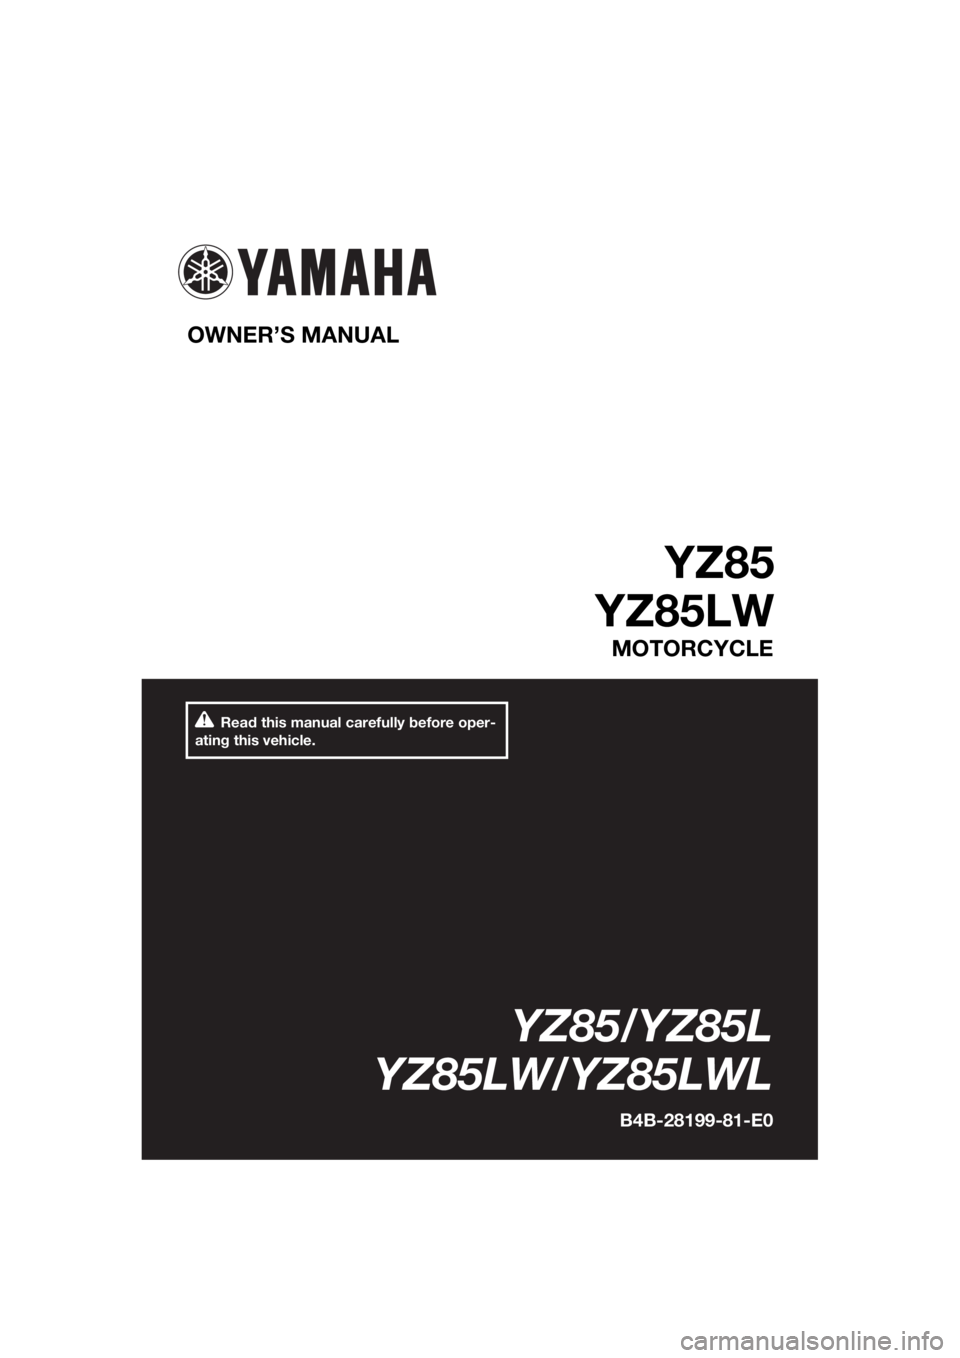 YAMAHA YZ85 2020  Owners Manual Read this manual carefully before oper-
ating this vehicle.
OWNER’S MANUAL 
YZ85
YZ85LW
MOTORCYCLE
YZ85/YZ85L
YZ85LW/YZ85LWL
B4B-28199-81-E0
UB4B81E0.book  Page 1  Friday, March 1, 2019  2:54 PM 